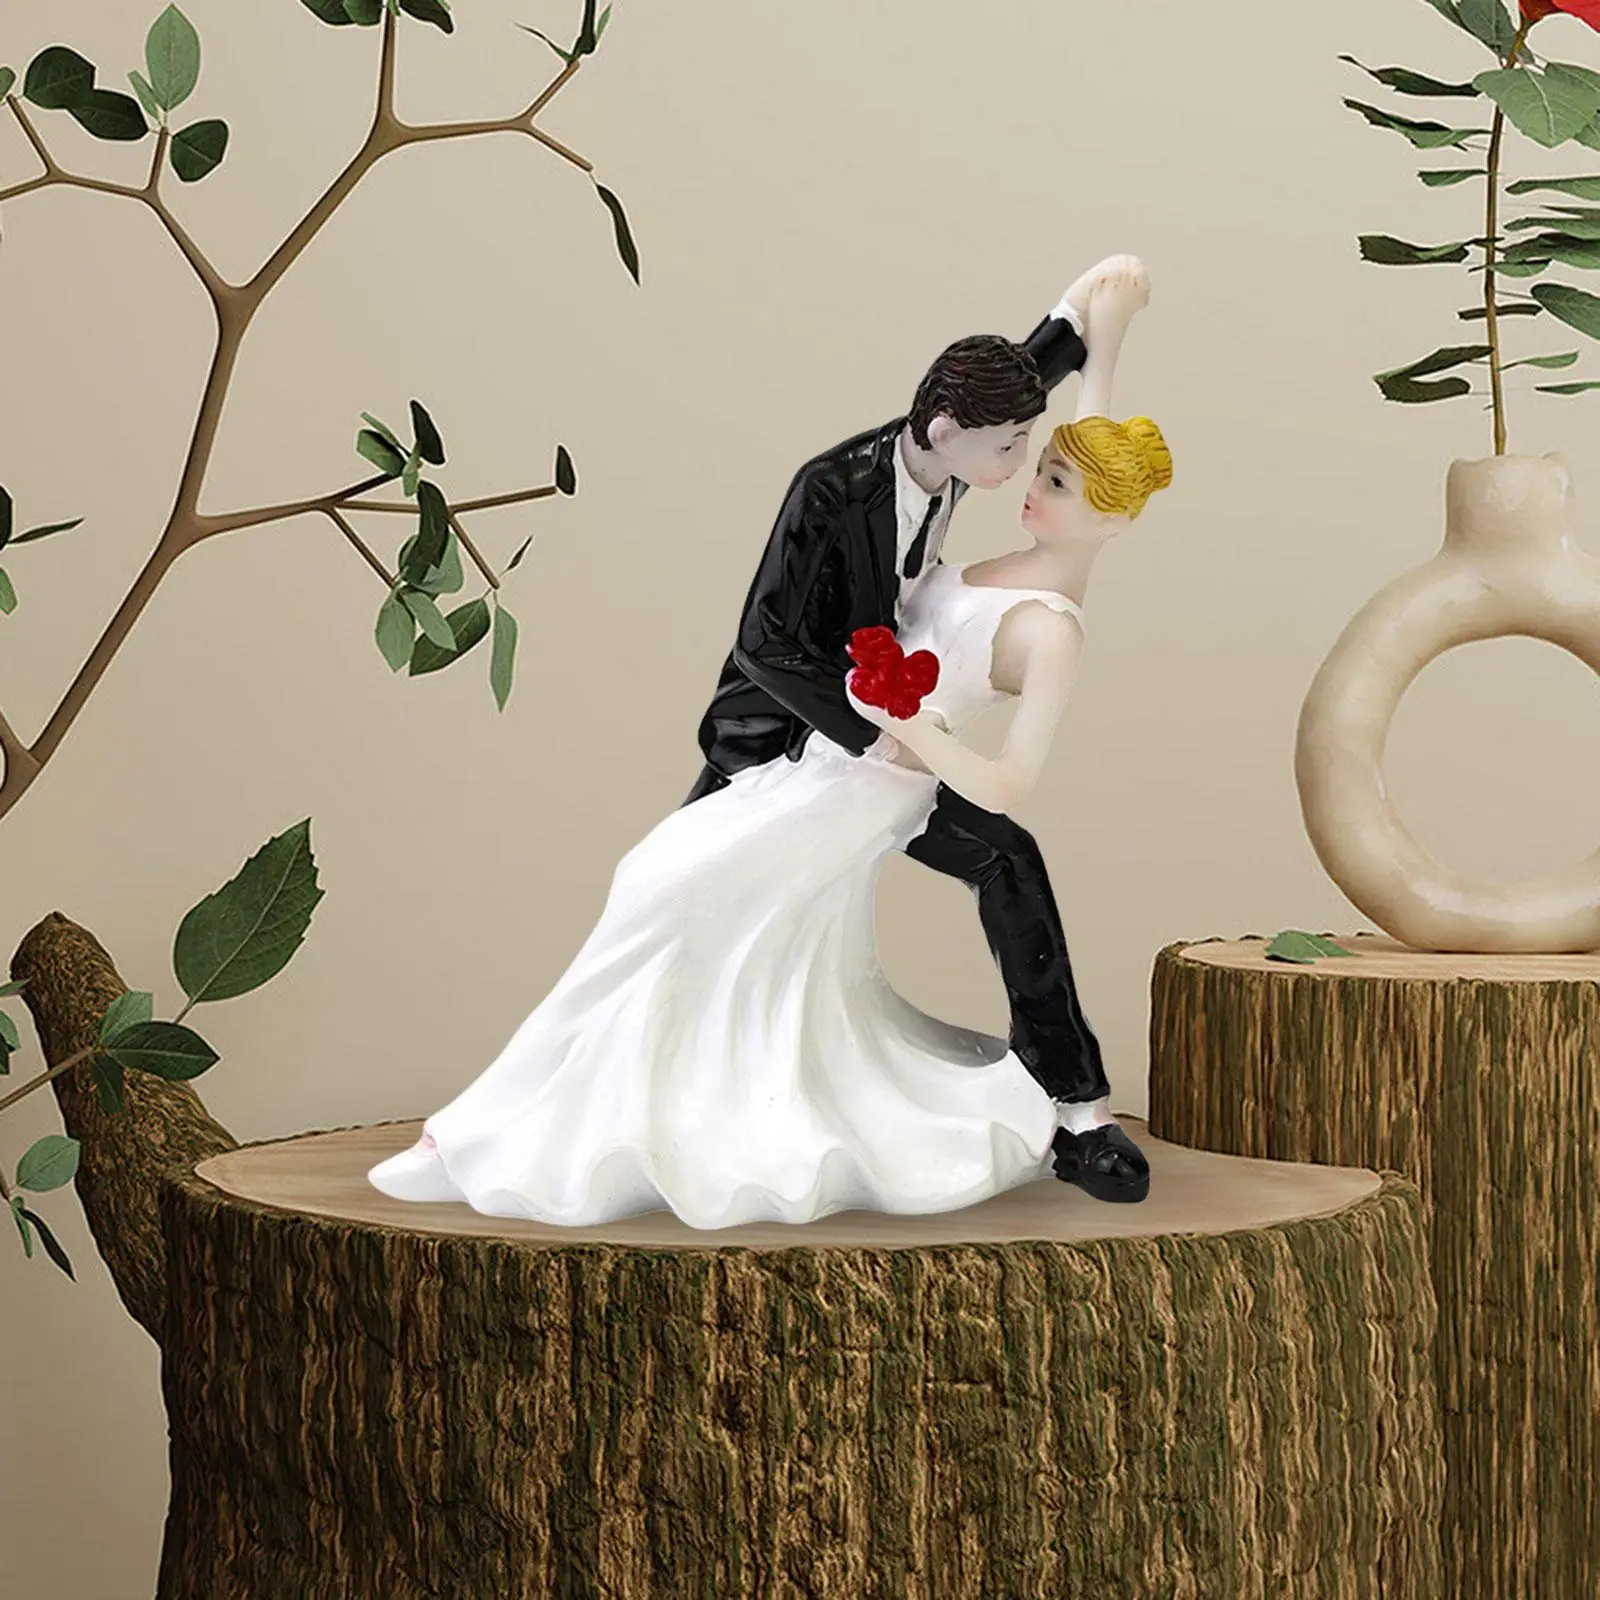 

Tango Dance Sandtable Decoration Realistic Decoration Ornament Bride and Groom Set for Wedding Sand Table DIY Scene DIY Projects